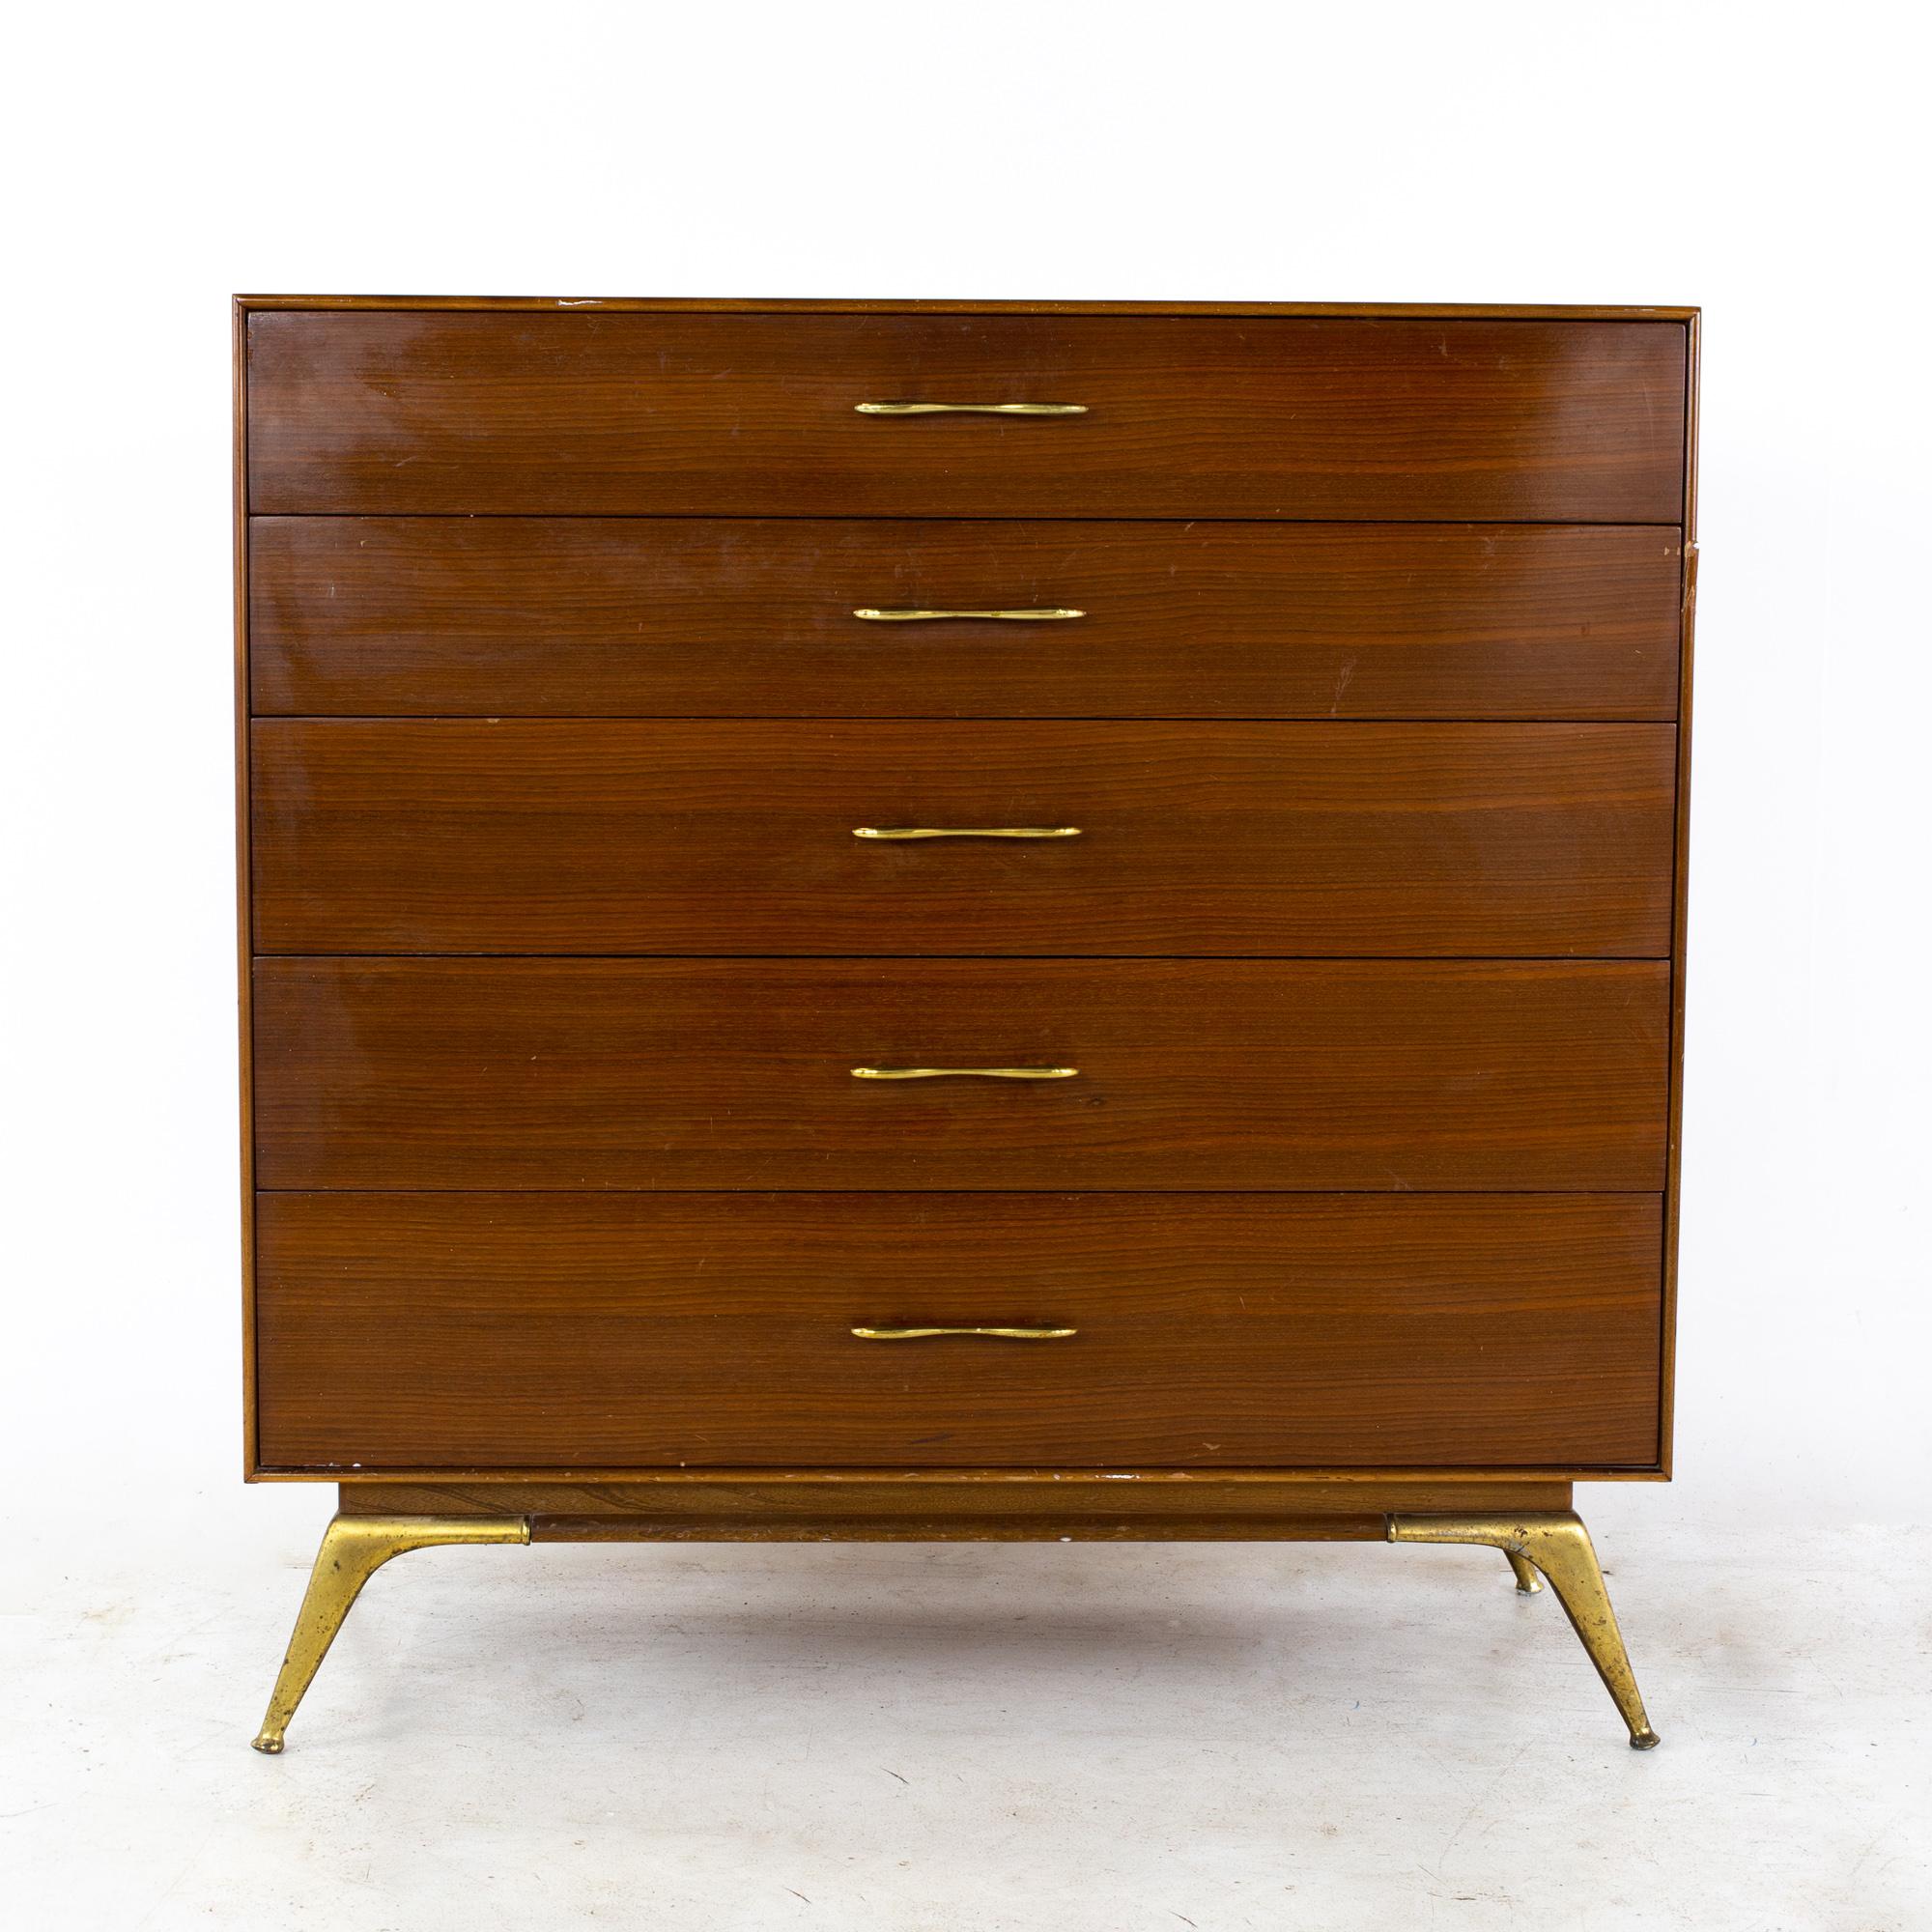 R-way mid century walnut and brass highboy dresser
Dresser measures: 38.5 wide x 18.5 deep x 40.5 inches high

All pieces of furniture can be had in what we call restored vintage condition. That means the piece is restored upon purchase so it’s